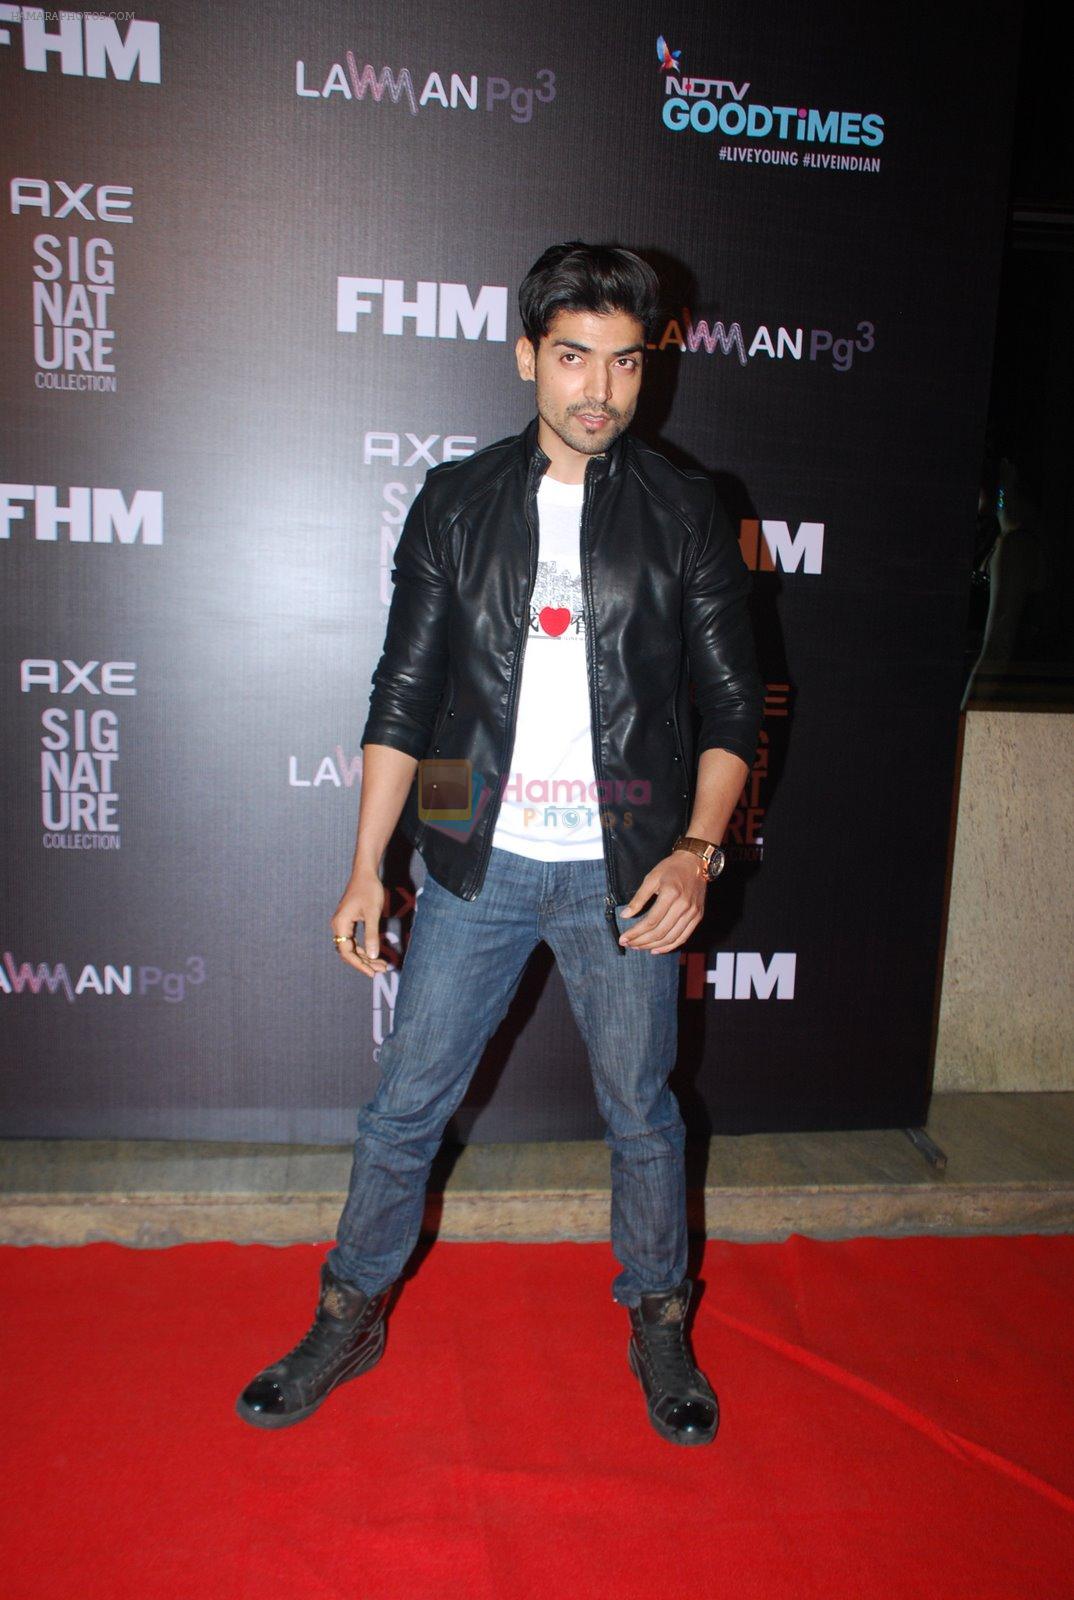 Gurmeet Chaudhary at Fhm bachelor of the year bash in Hard Rock Cafe on 22nd Dec 2014